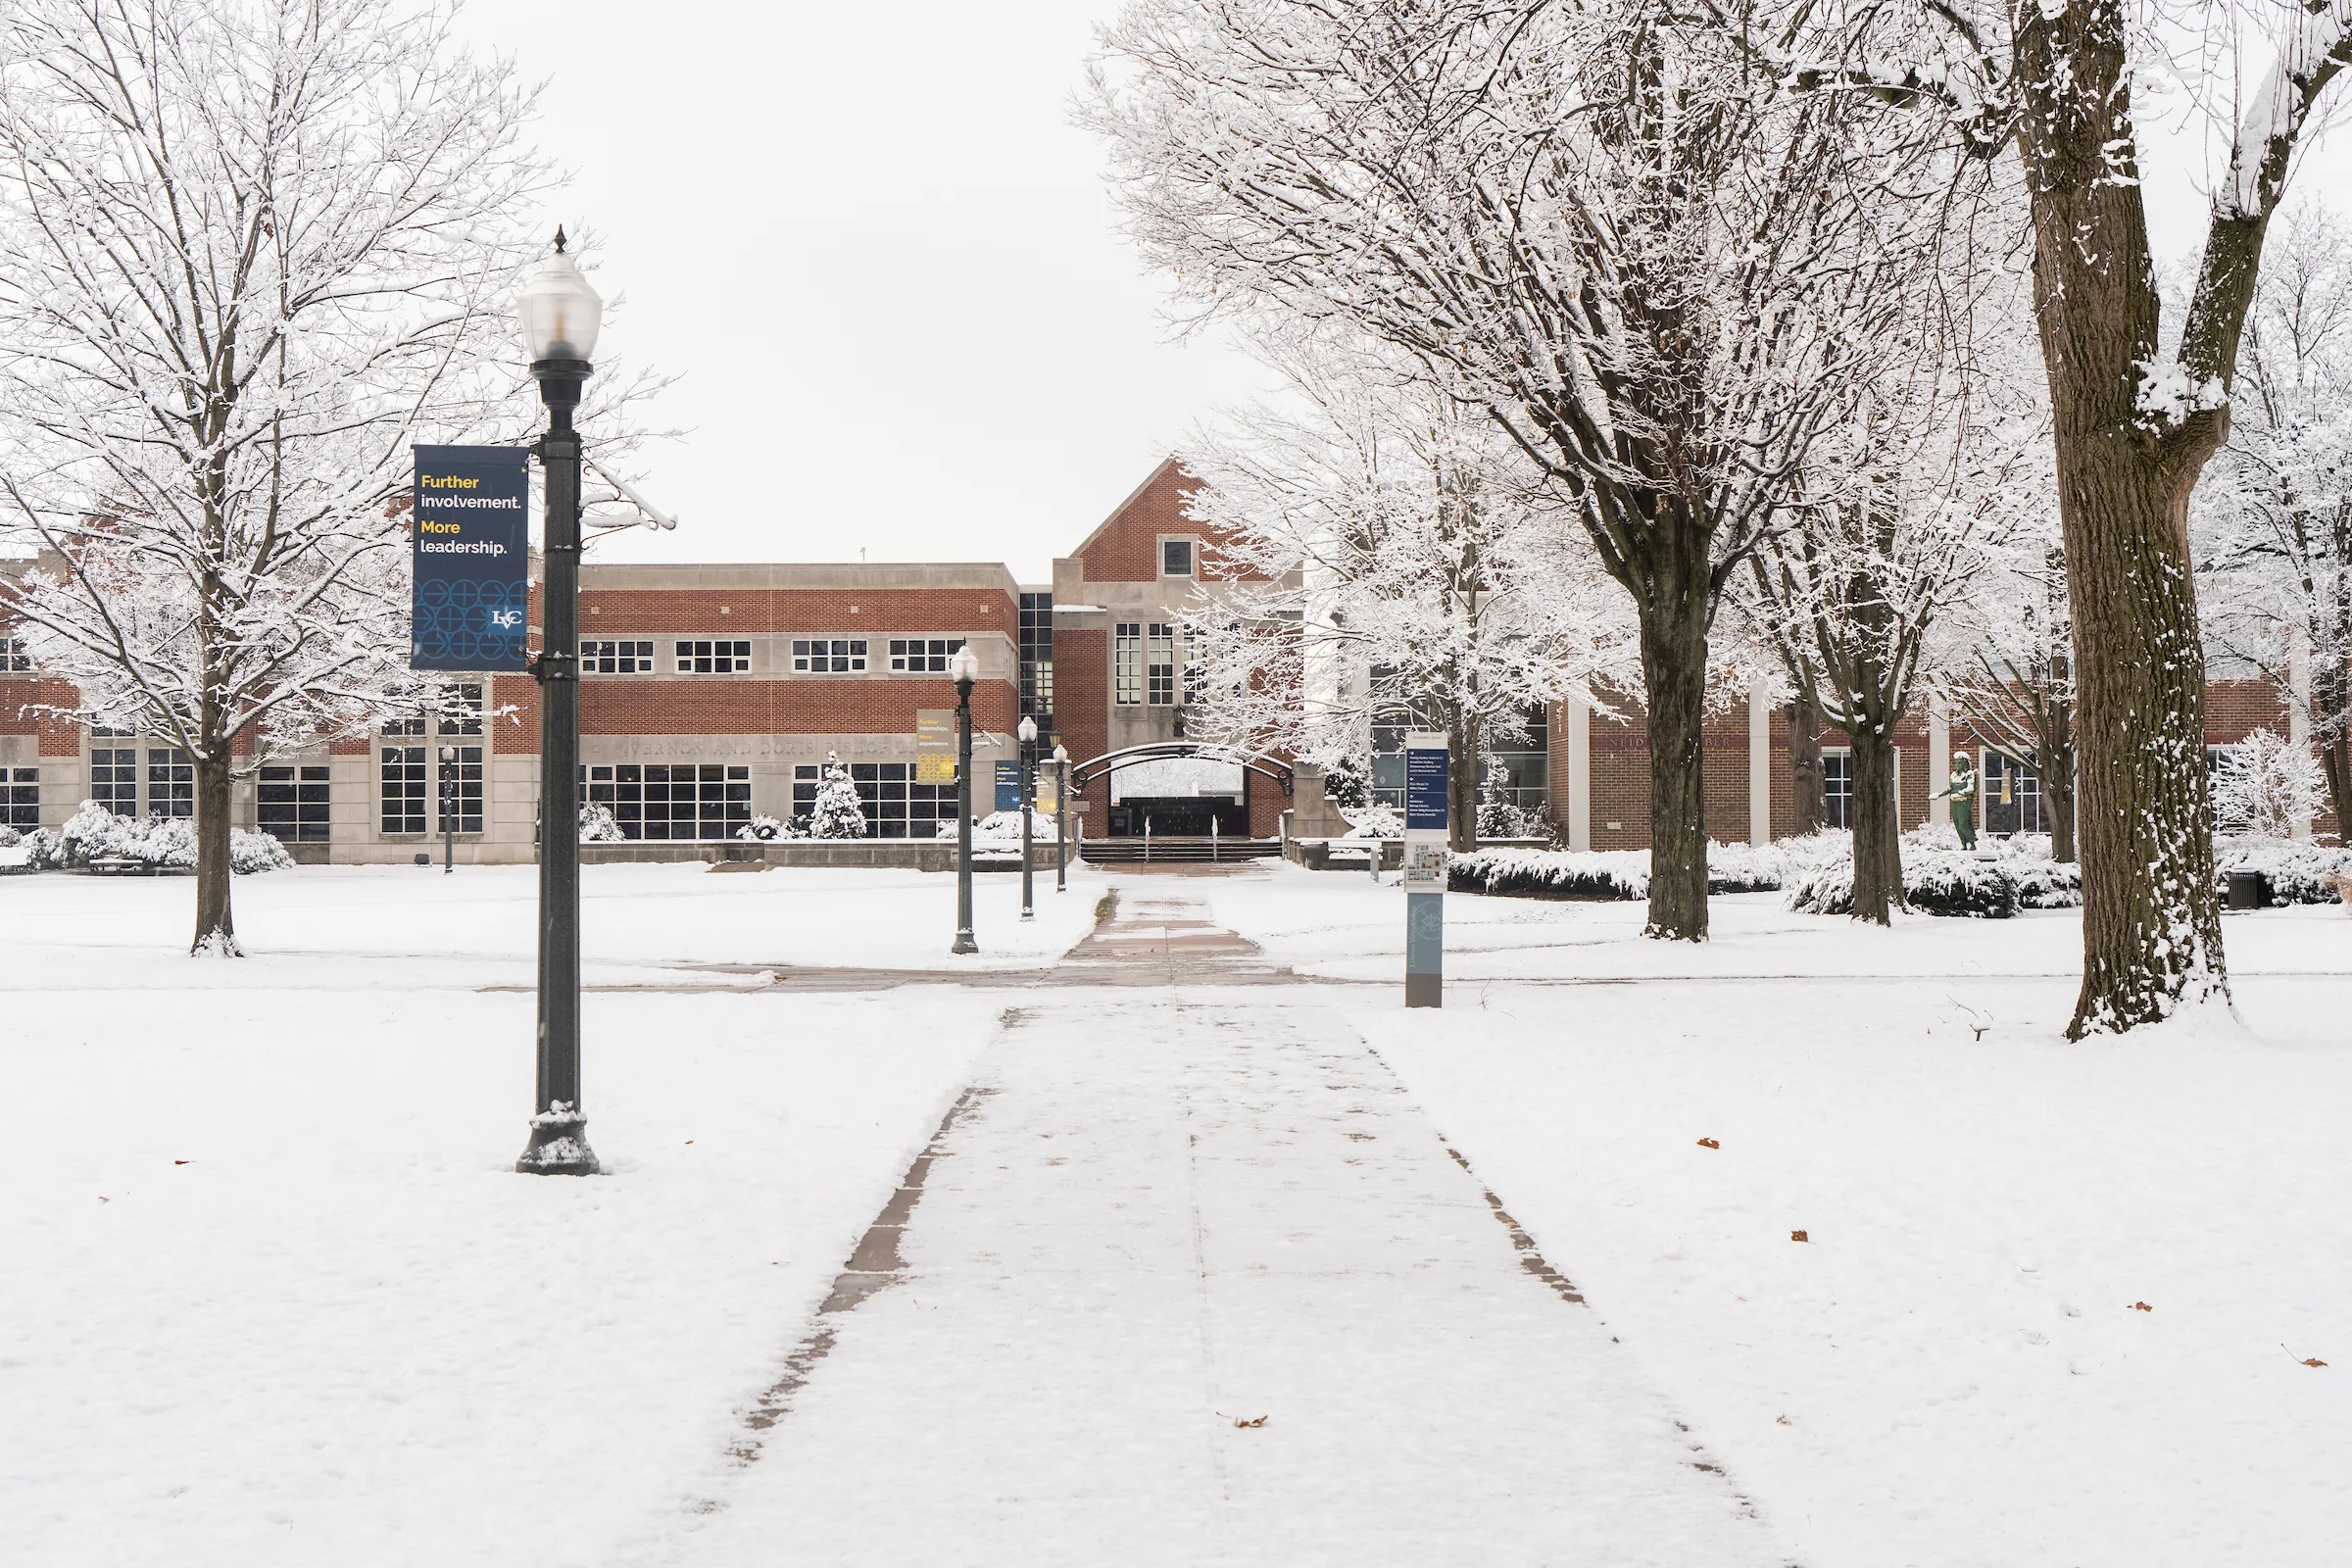 LVC Academic quad with snow on ground and trees in winter